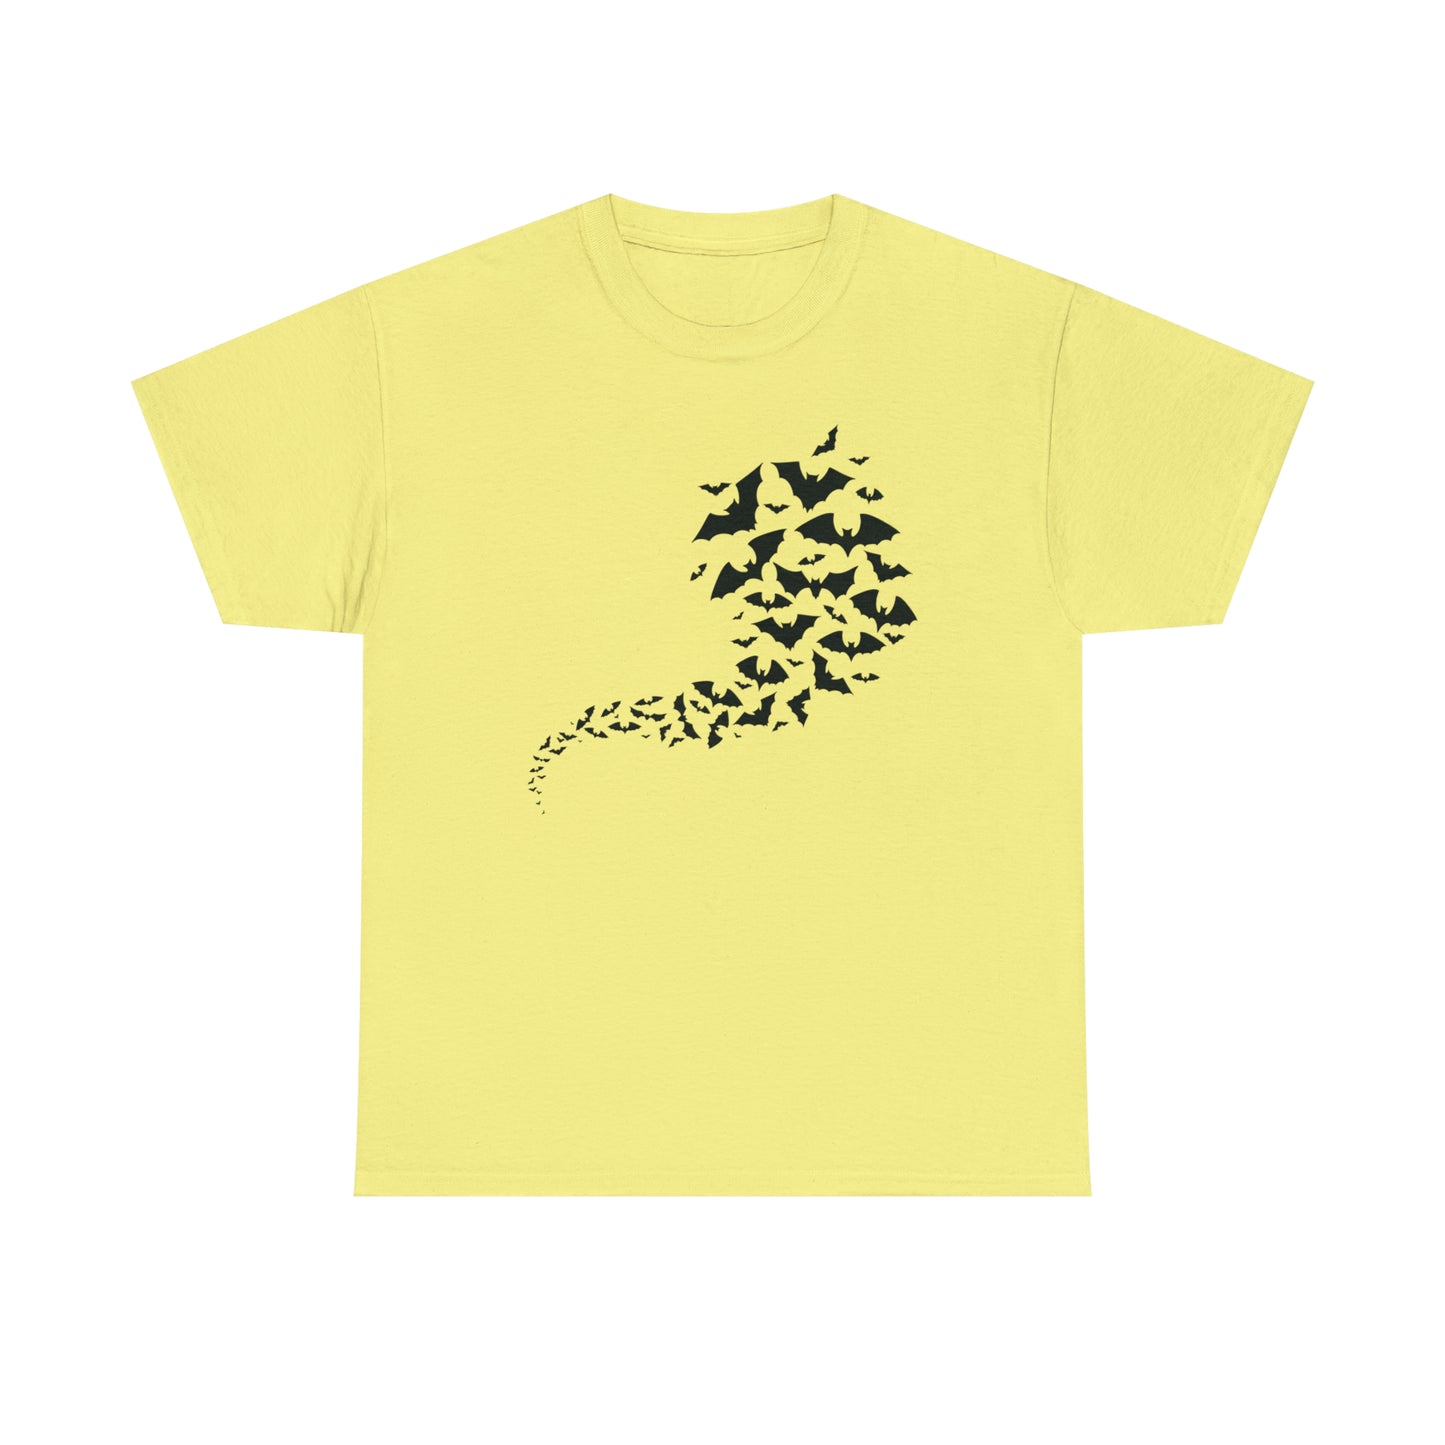 Halloween T-Shirt With Flying Bats T Shirt For Spooky Costume TShirt